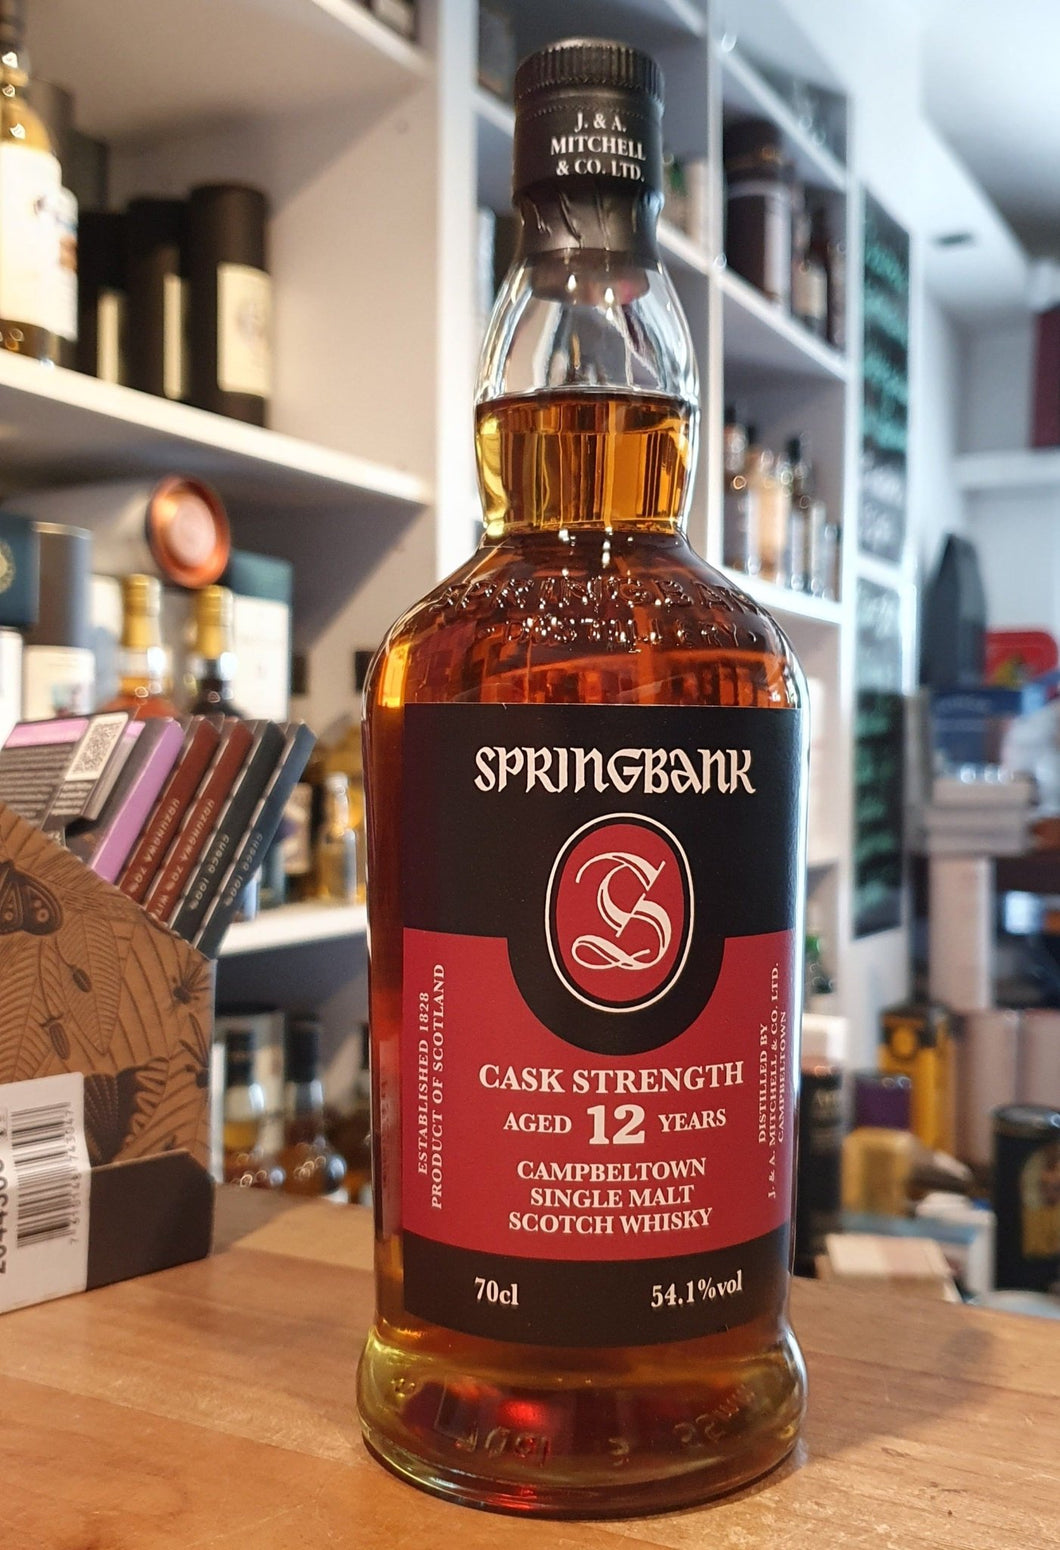 Springbank 12y Cask Strength 2023 o.Dose 0,7l 54,1% vol. Schottland Campbeltown  60 % Ex-Bourbon und 40 % Sherryfässer  LIMITED EDITION Cask   Nase Toffee apple sweetness kicks off this cask strength whisky, along with notes of parma ham, hazelnut and marzipan.Icon Geschmack  Gaumen  The palate introduces soft peat smoke and notes of morello cherries and aniseed, creamy mouth feelreminiscent cusard creams. Icon coastal influence emerges brine, oil salted caramel, persistent peat smoke.